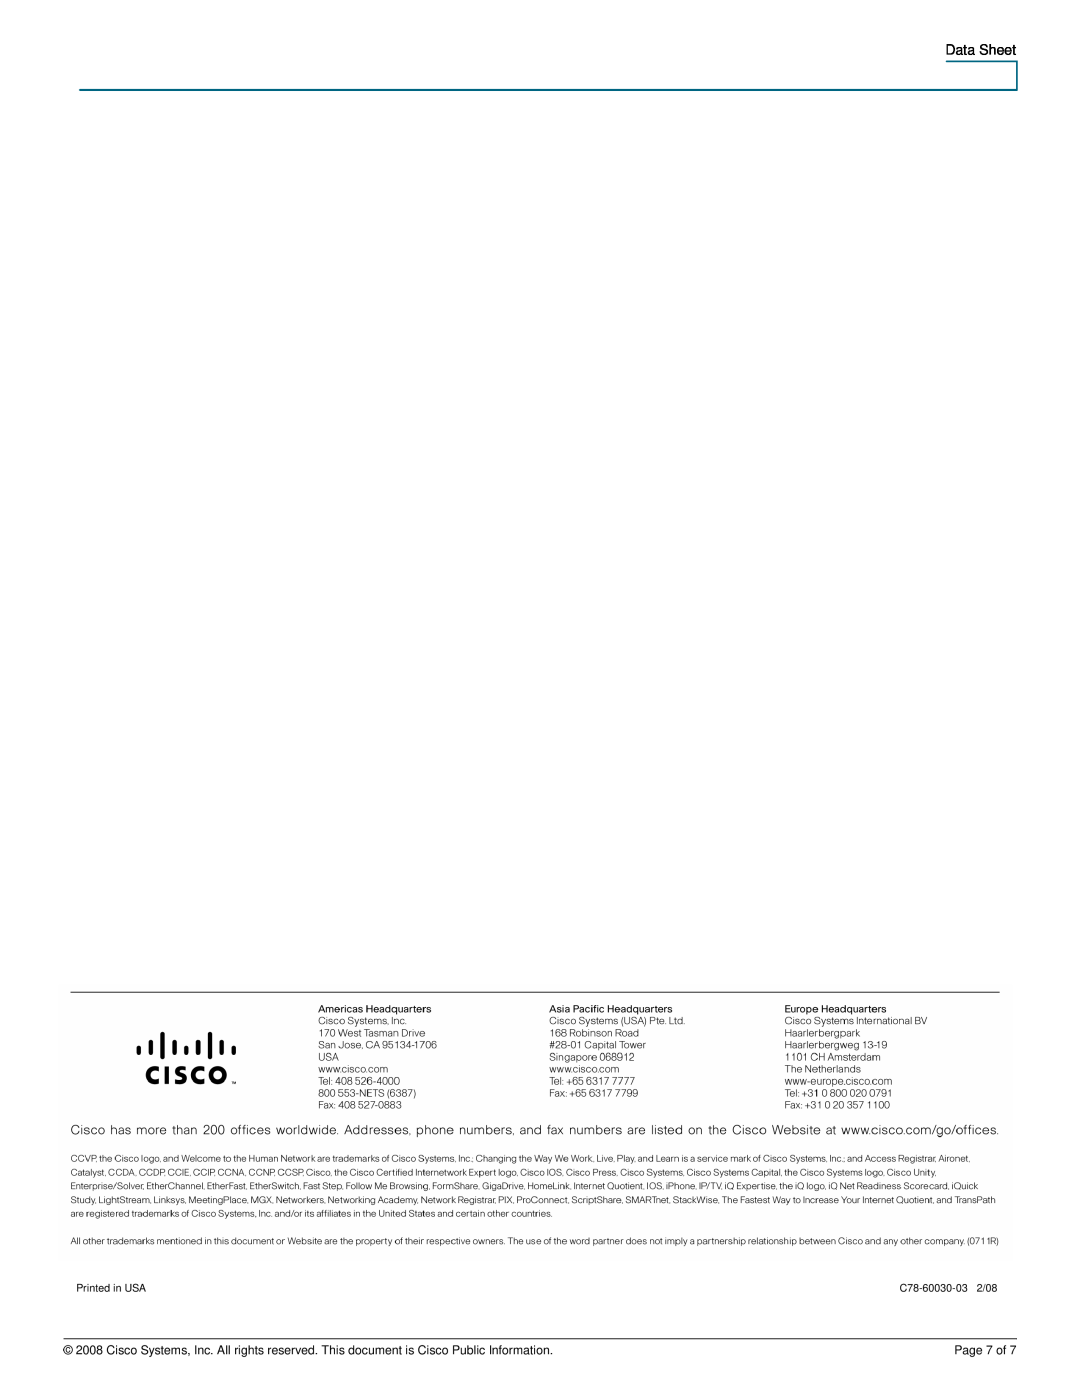 Cisco Systems CUVAV224BUN manual Data Sheet, Printed in USA, C78-60030-03 2/08, Page 7 of 